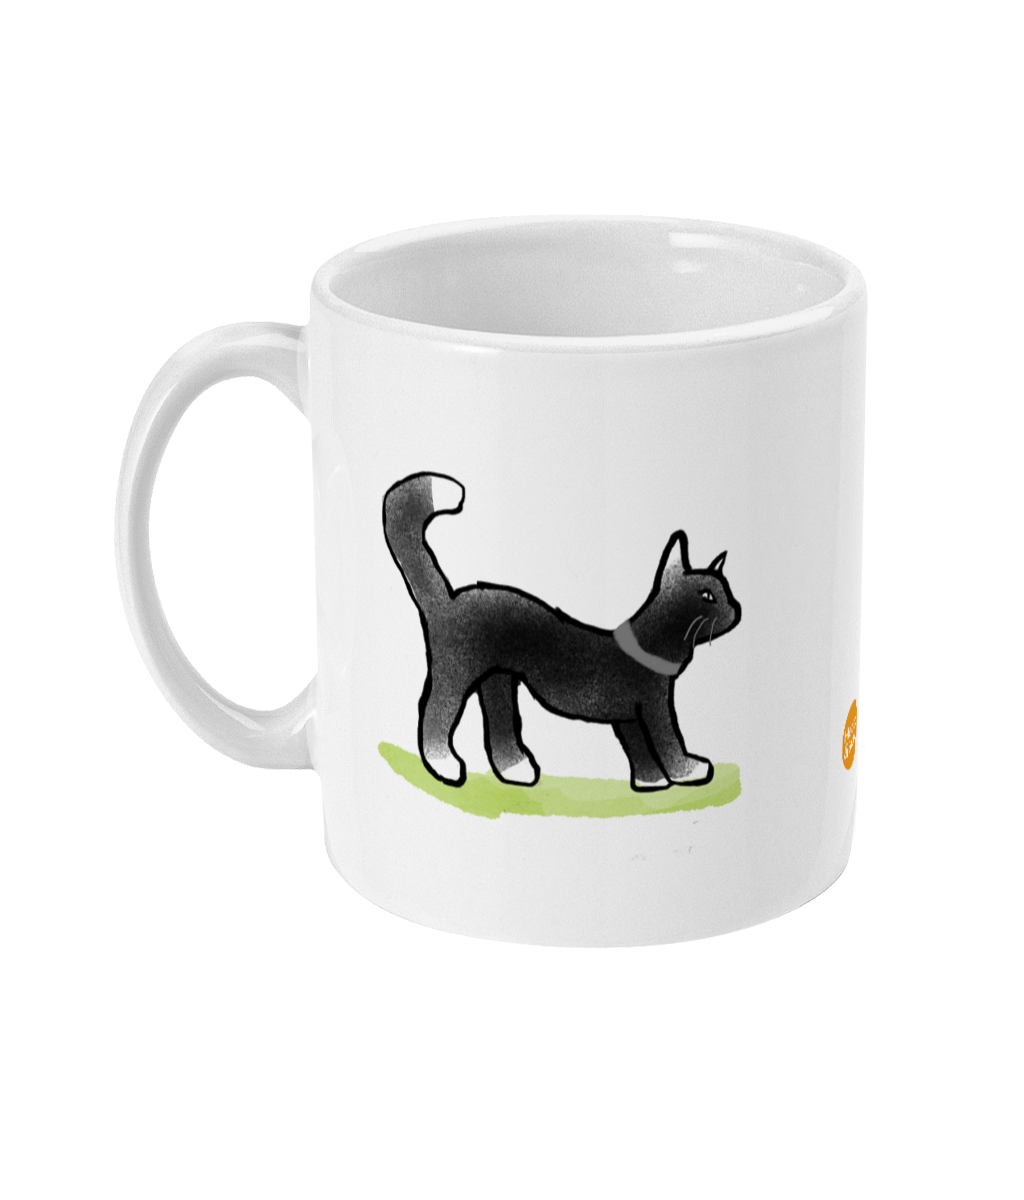 Black Cat coffee mug design by Hector and Bone Left View